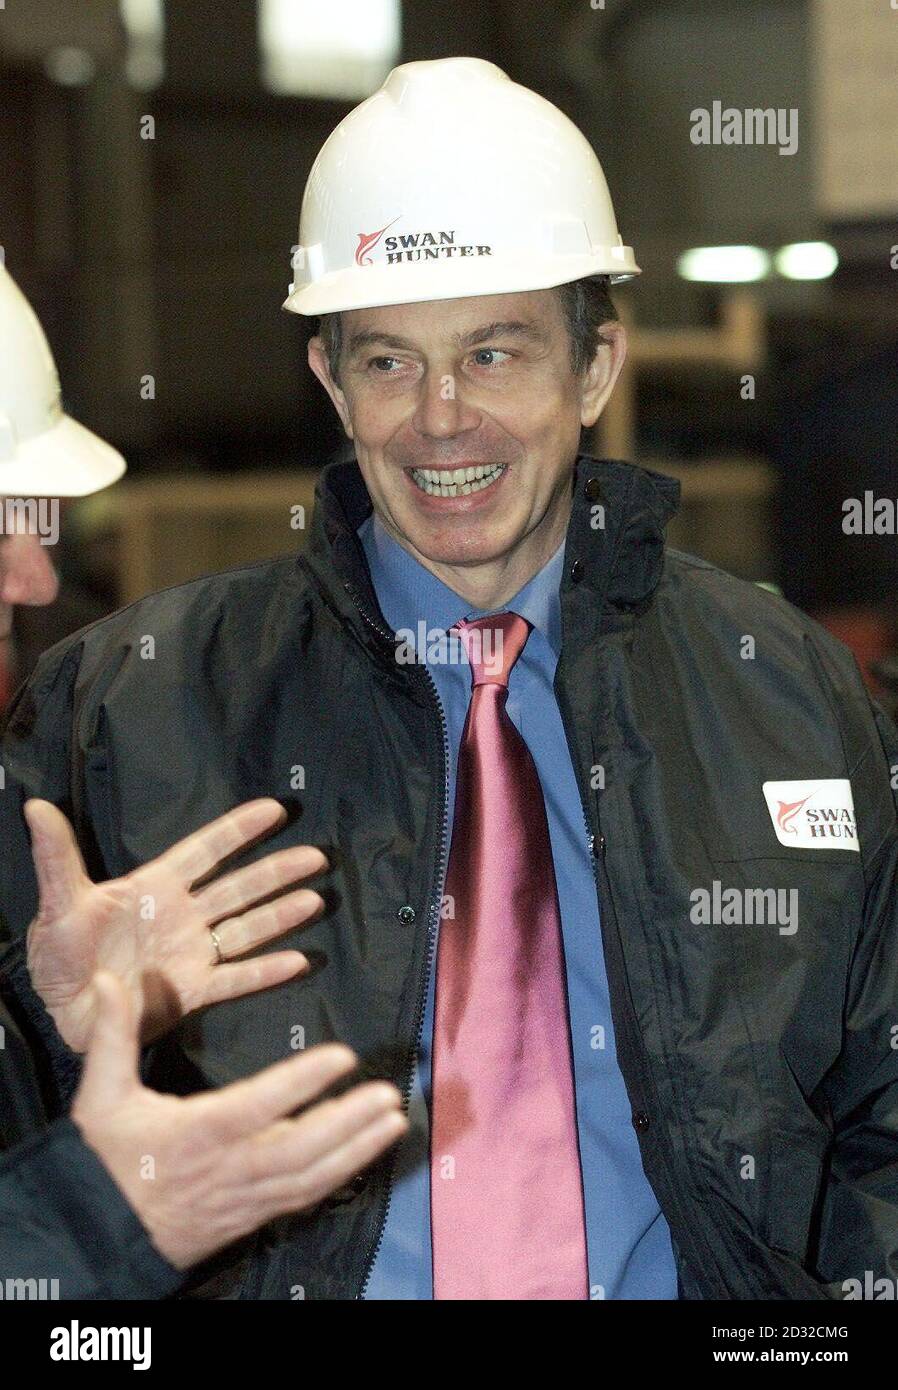 Prime Minister Tony Blair wears a safety hat during a visit, to the Swan Hunter shipyard at Tyneside.  Work has begun at the yard on Ministry of Defence orders to build two vessels for the Royal Fleet Auxiliary.  * ... and yard chairman Yaap Kroese said the firm, which employs more than 700 people, was in the running to increase its order book. Stock Photo